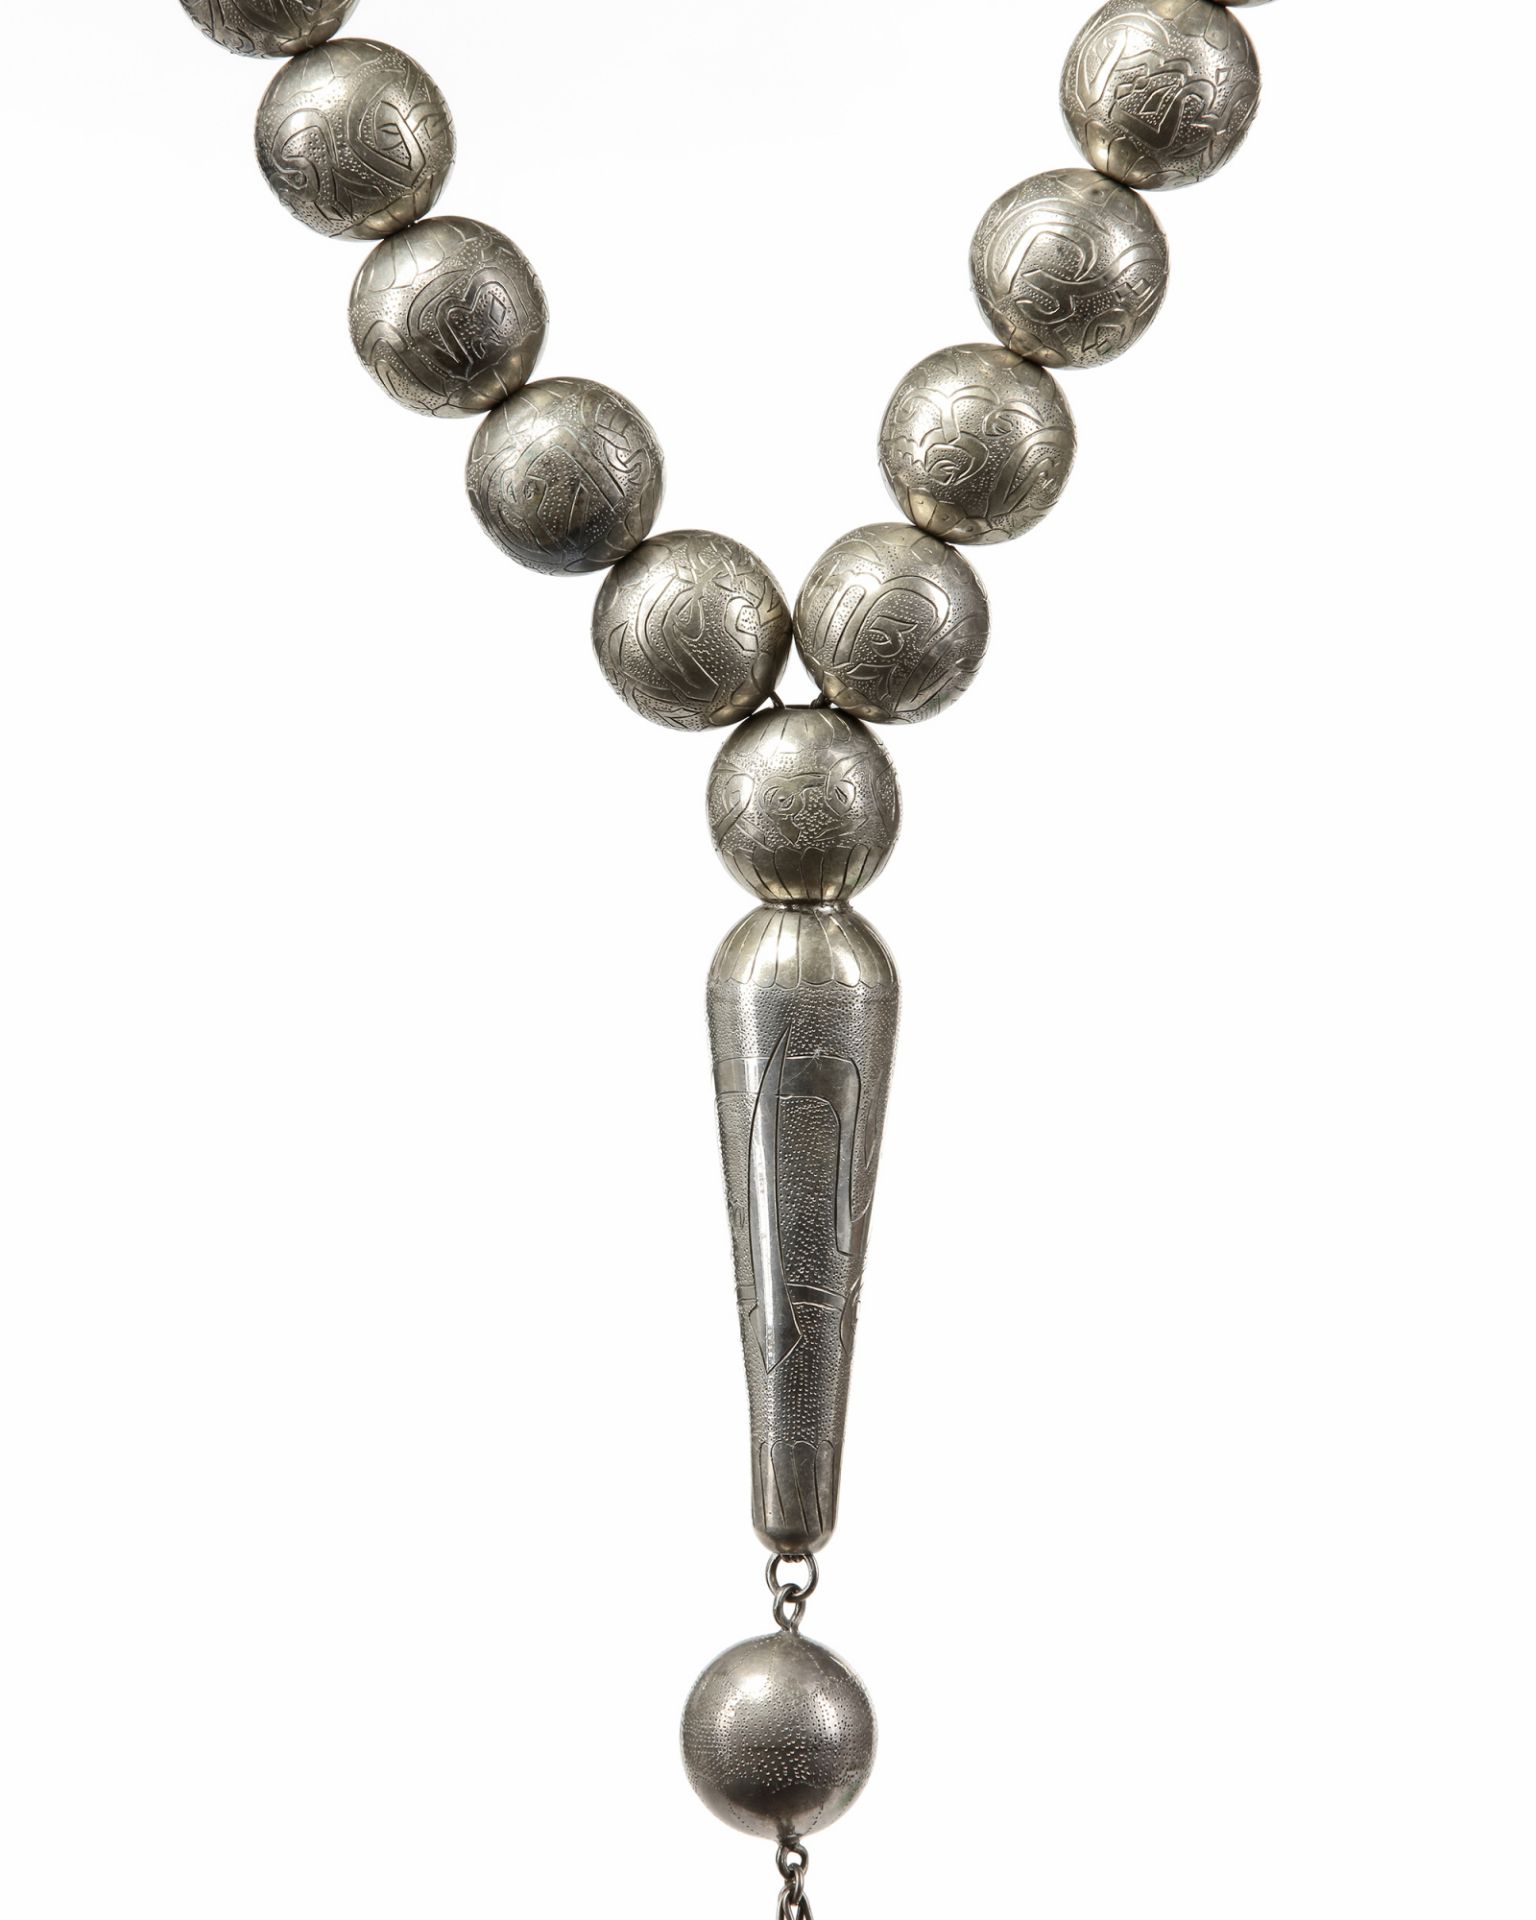 LARGE OTTOMAN SILVER PRAYER BEADS, LATE 19TH CENTURY - Image 7 of 12